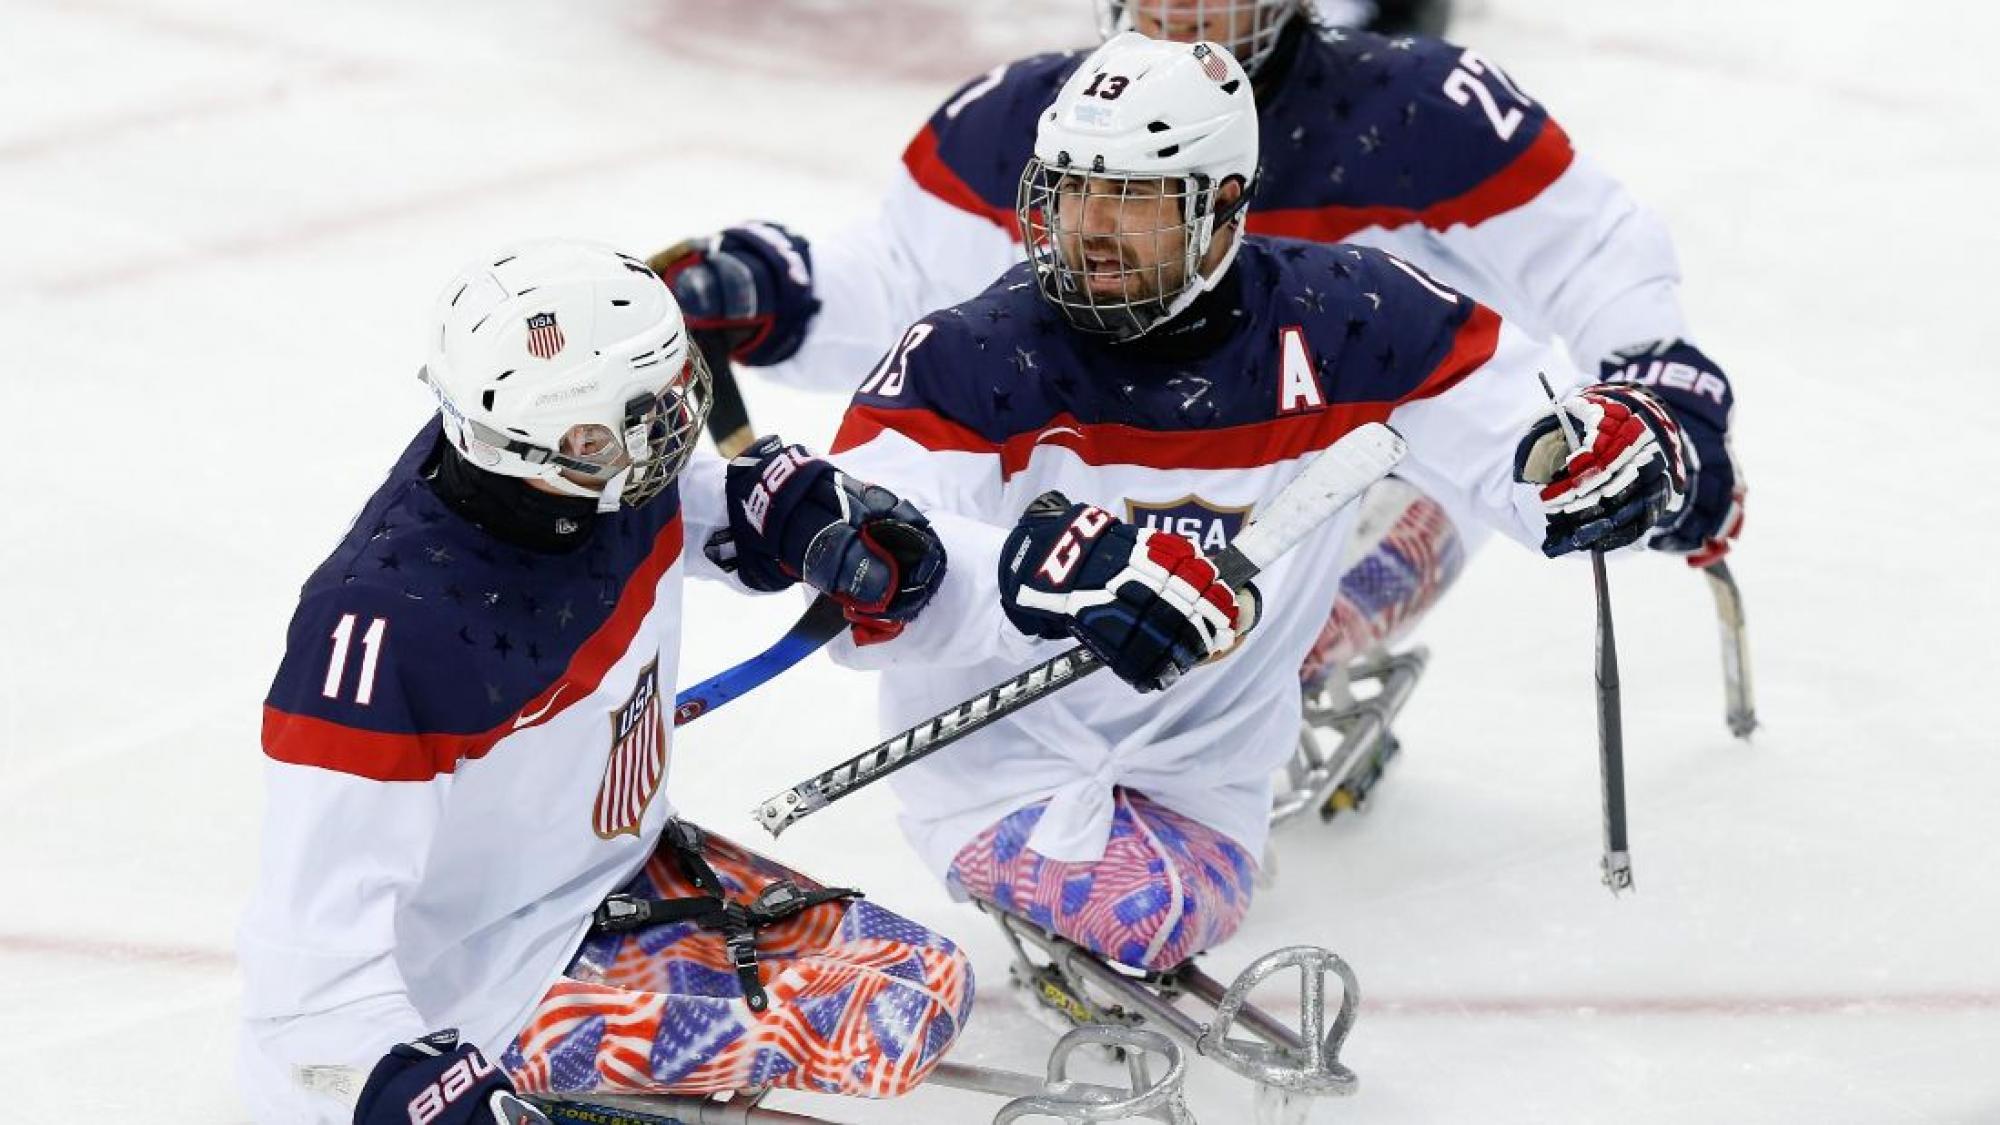 An ice sledge hockey player skates up to his teammate to celebrate.